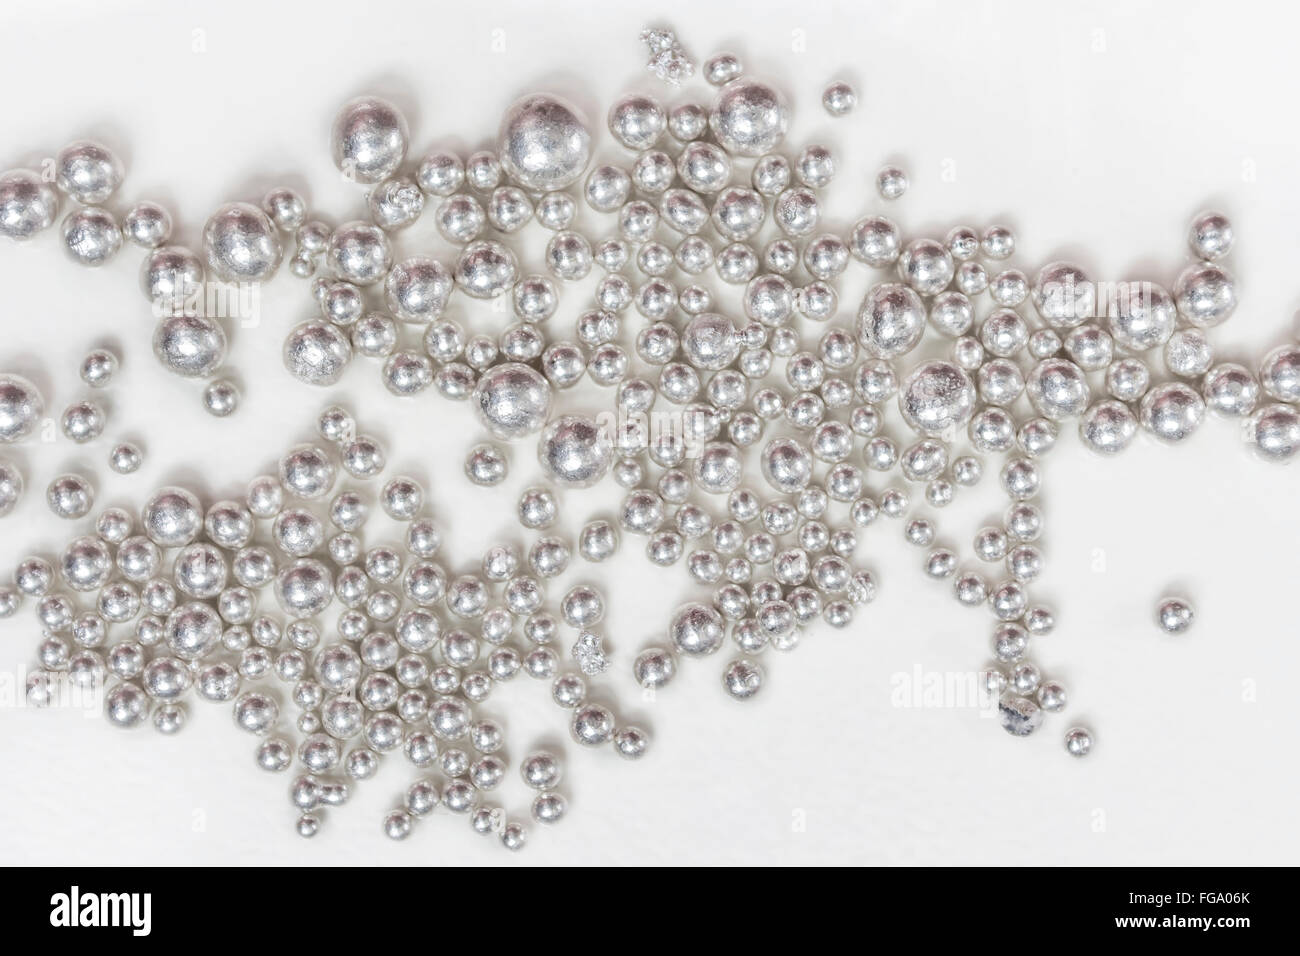 Pure silver granules on a white background Stock Photo